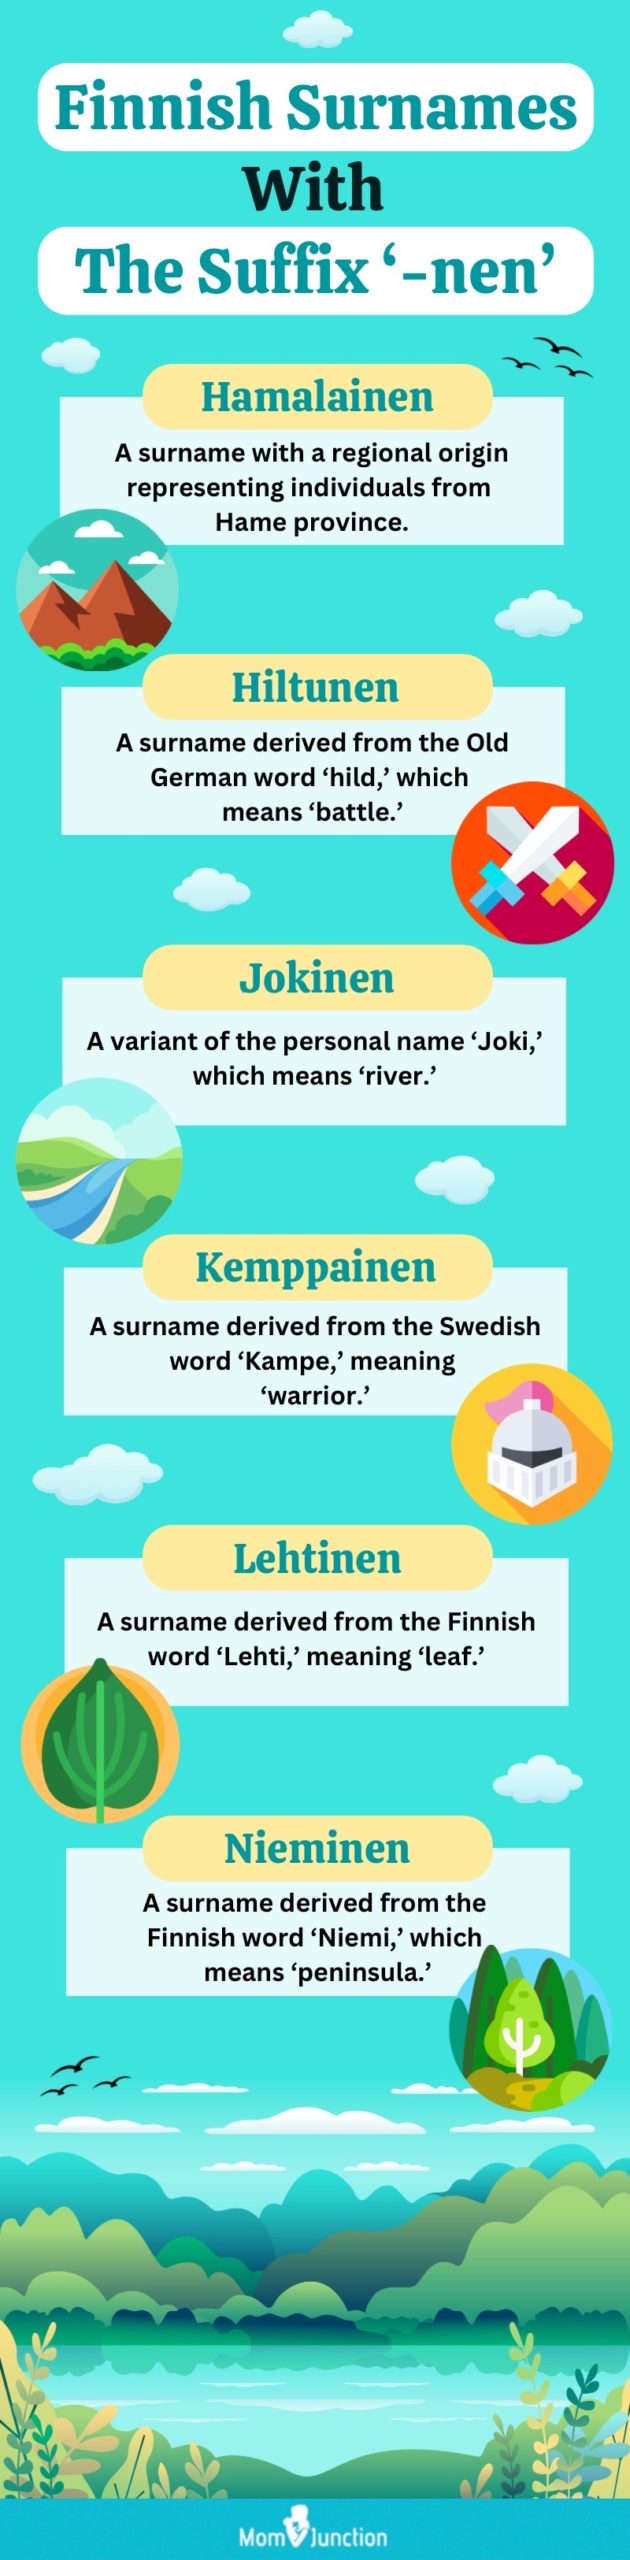 finnish surnames (infographic)